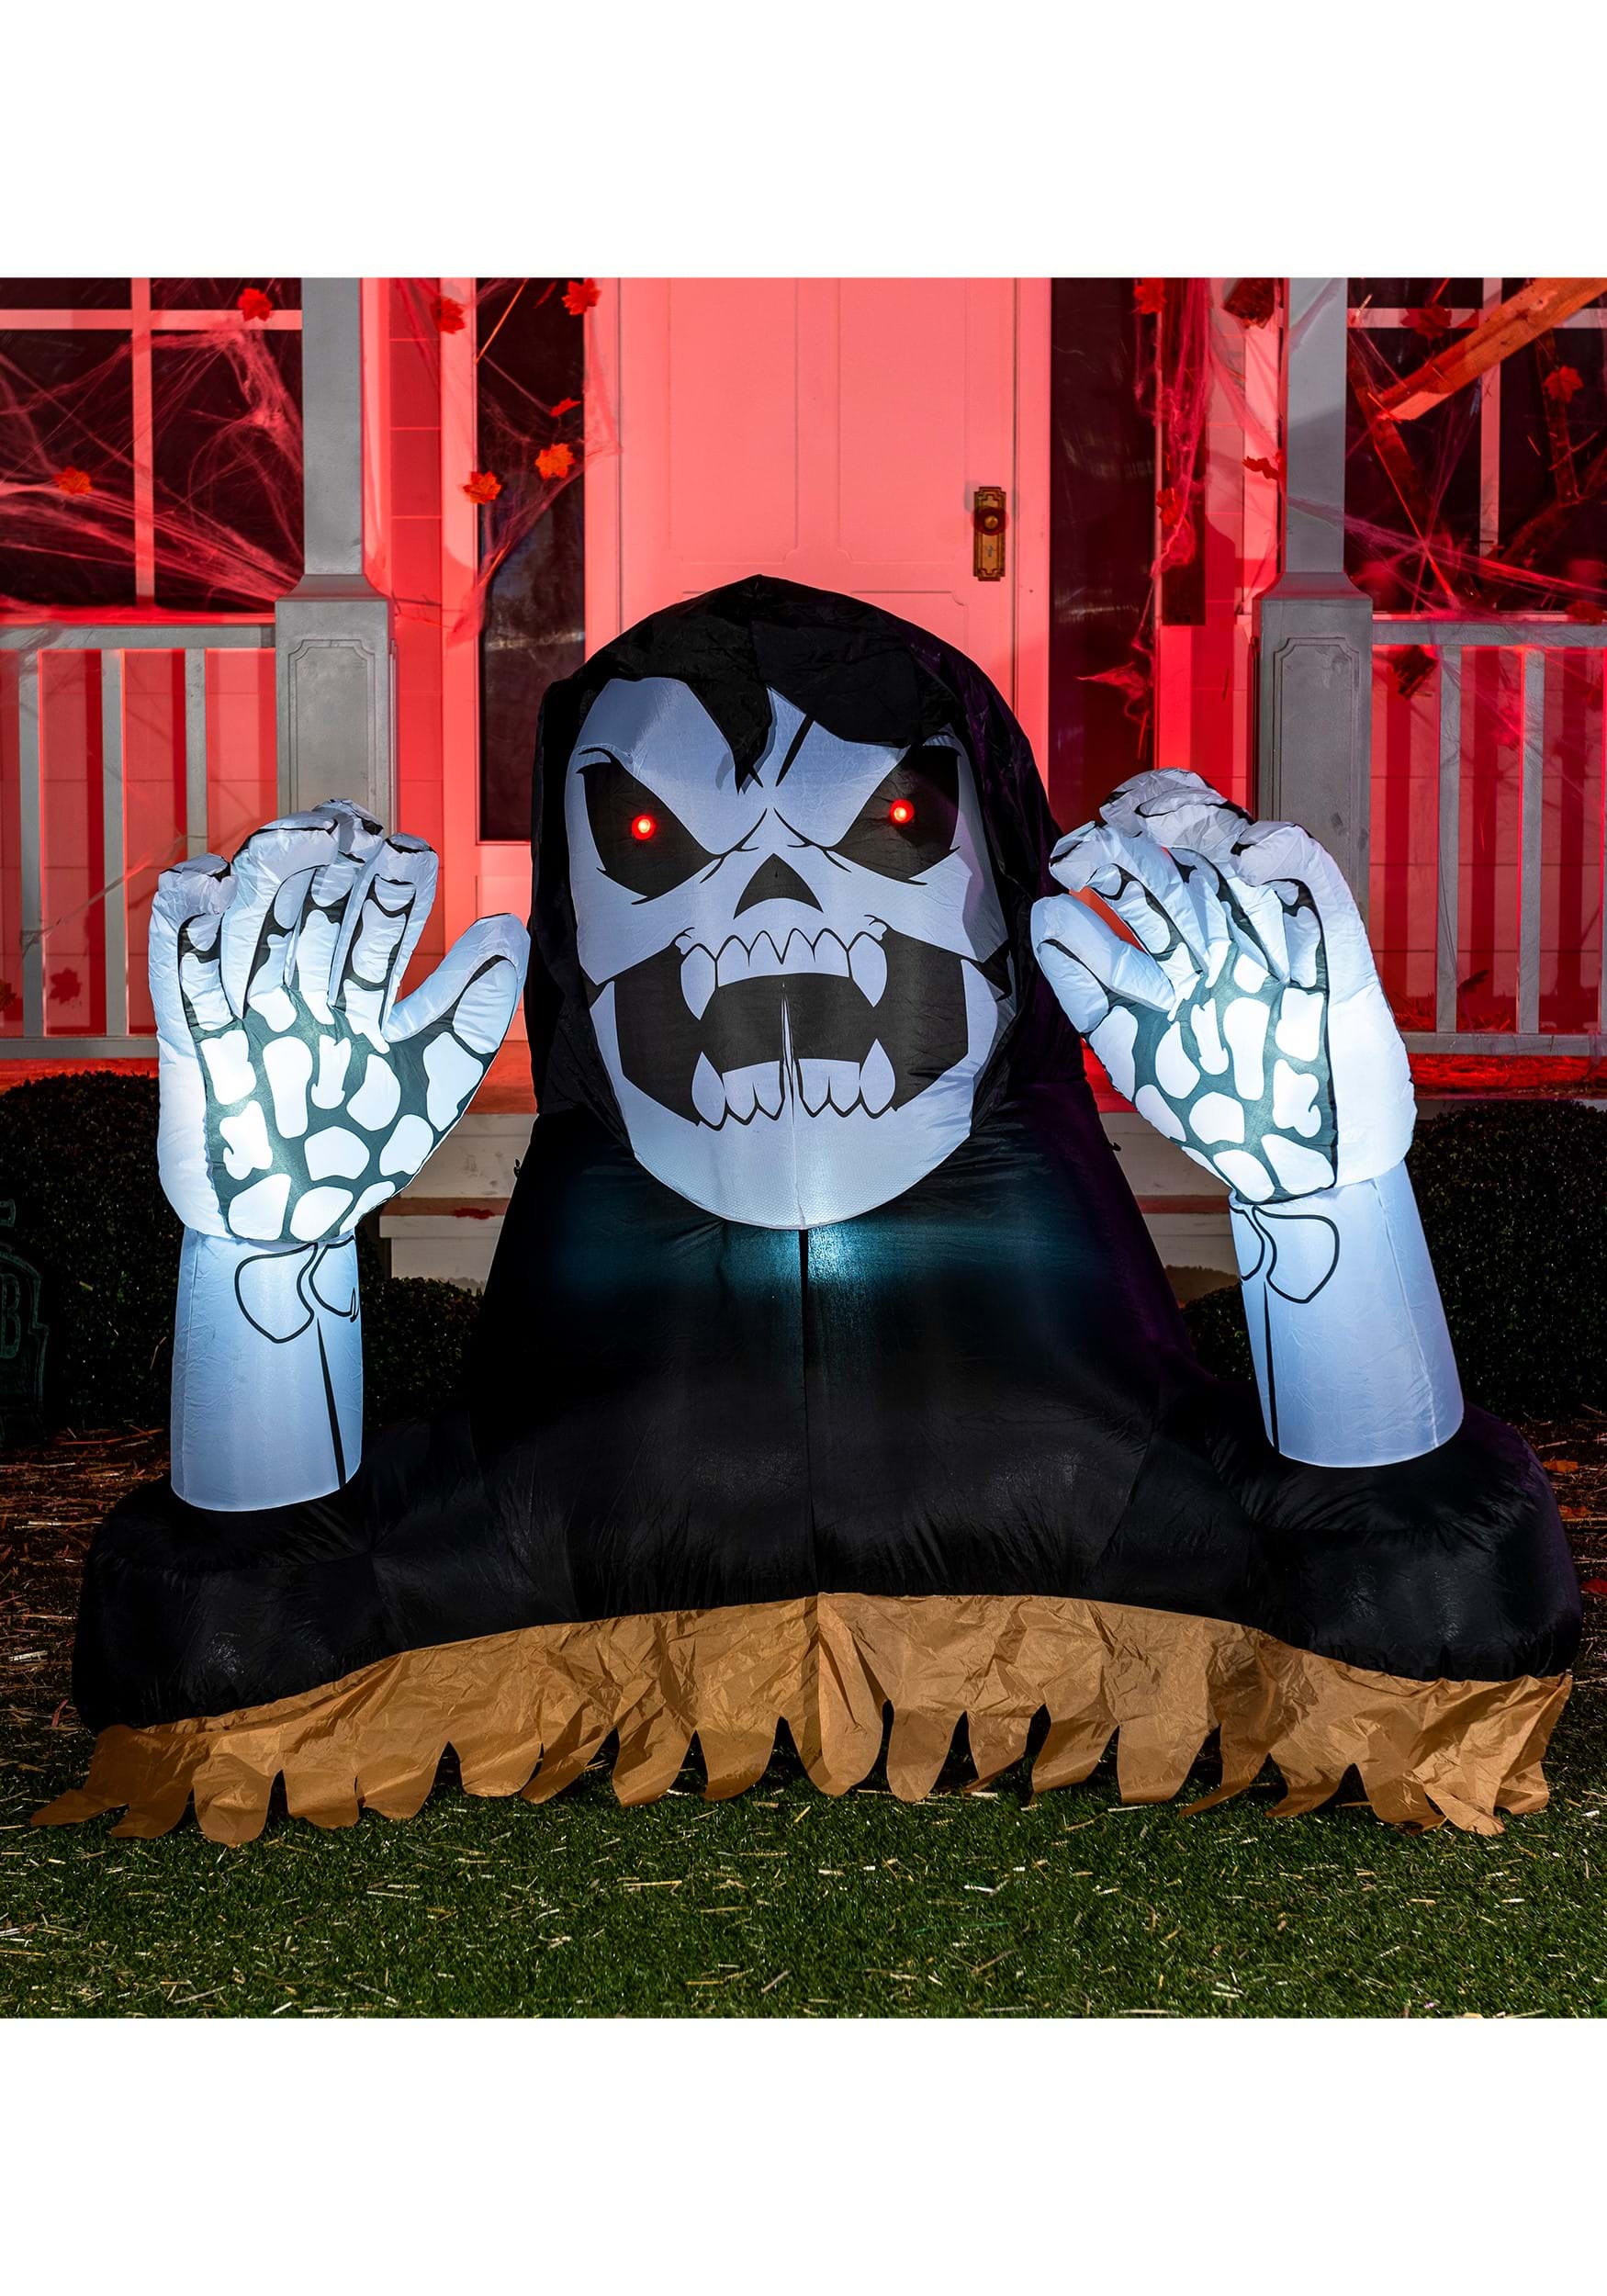 Rawring 4FT Tall Reaper Inflatable Decoration